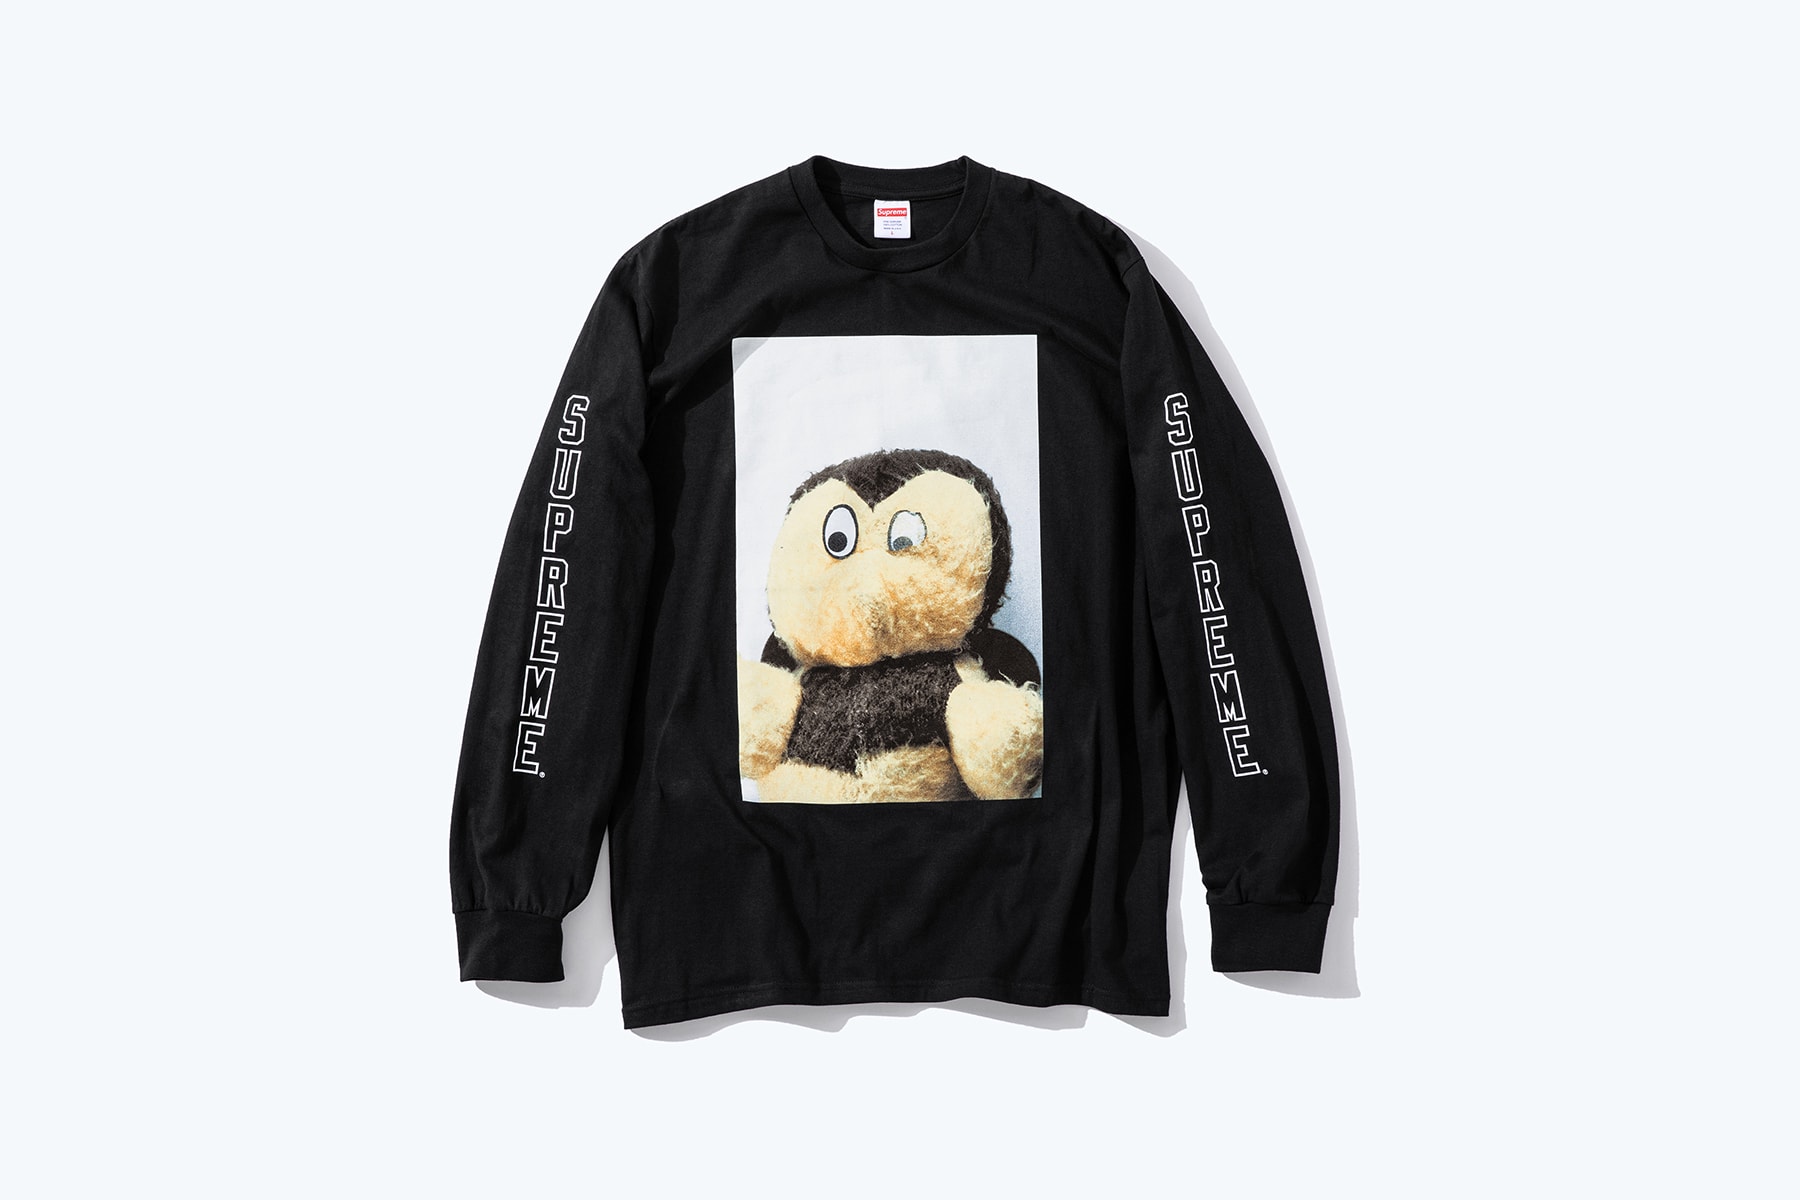 Supreme x Mike Kelley FW18 Release Art Contemporary Art Marcel Duchamp Readymade Michigan Detroit Music Sonic Youth Supreme Collaboration Hoodies Sweatshirts Work Jacket Destroy All Monsters MOMA Dadaists kitsch Conceptual Performance art